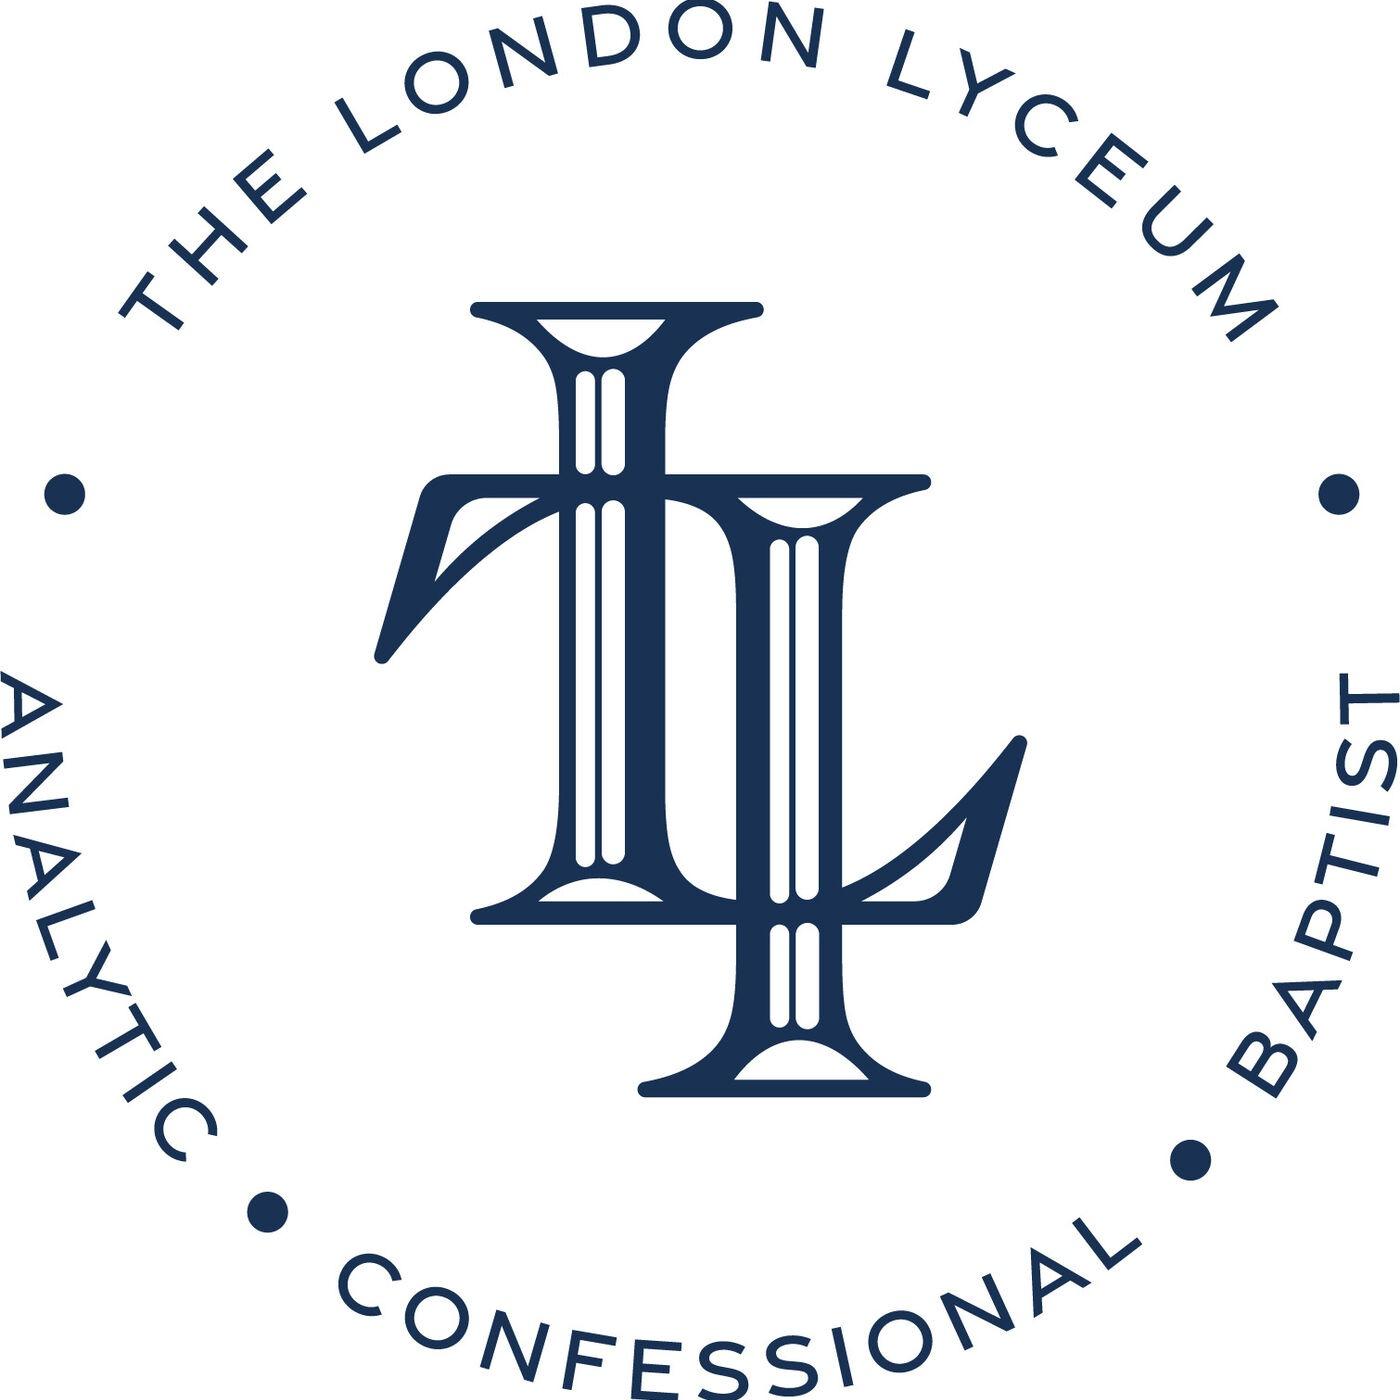 The London Lyceum